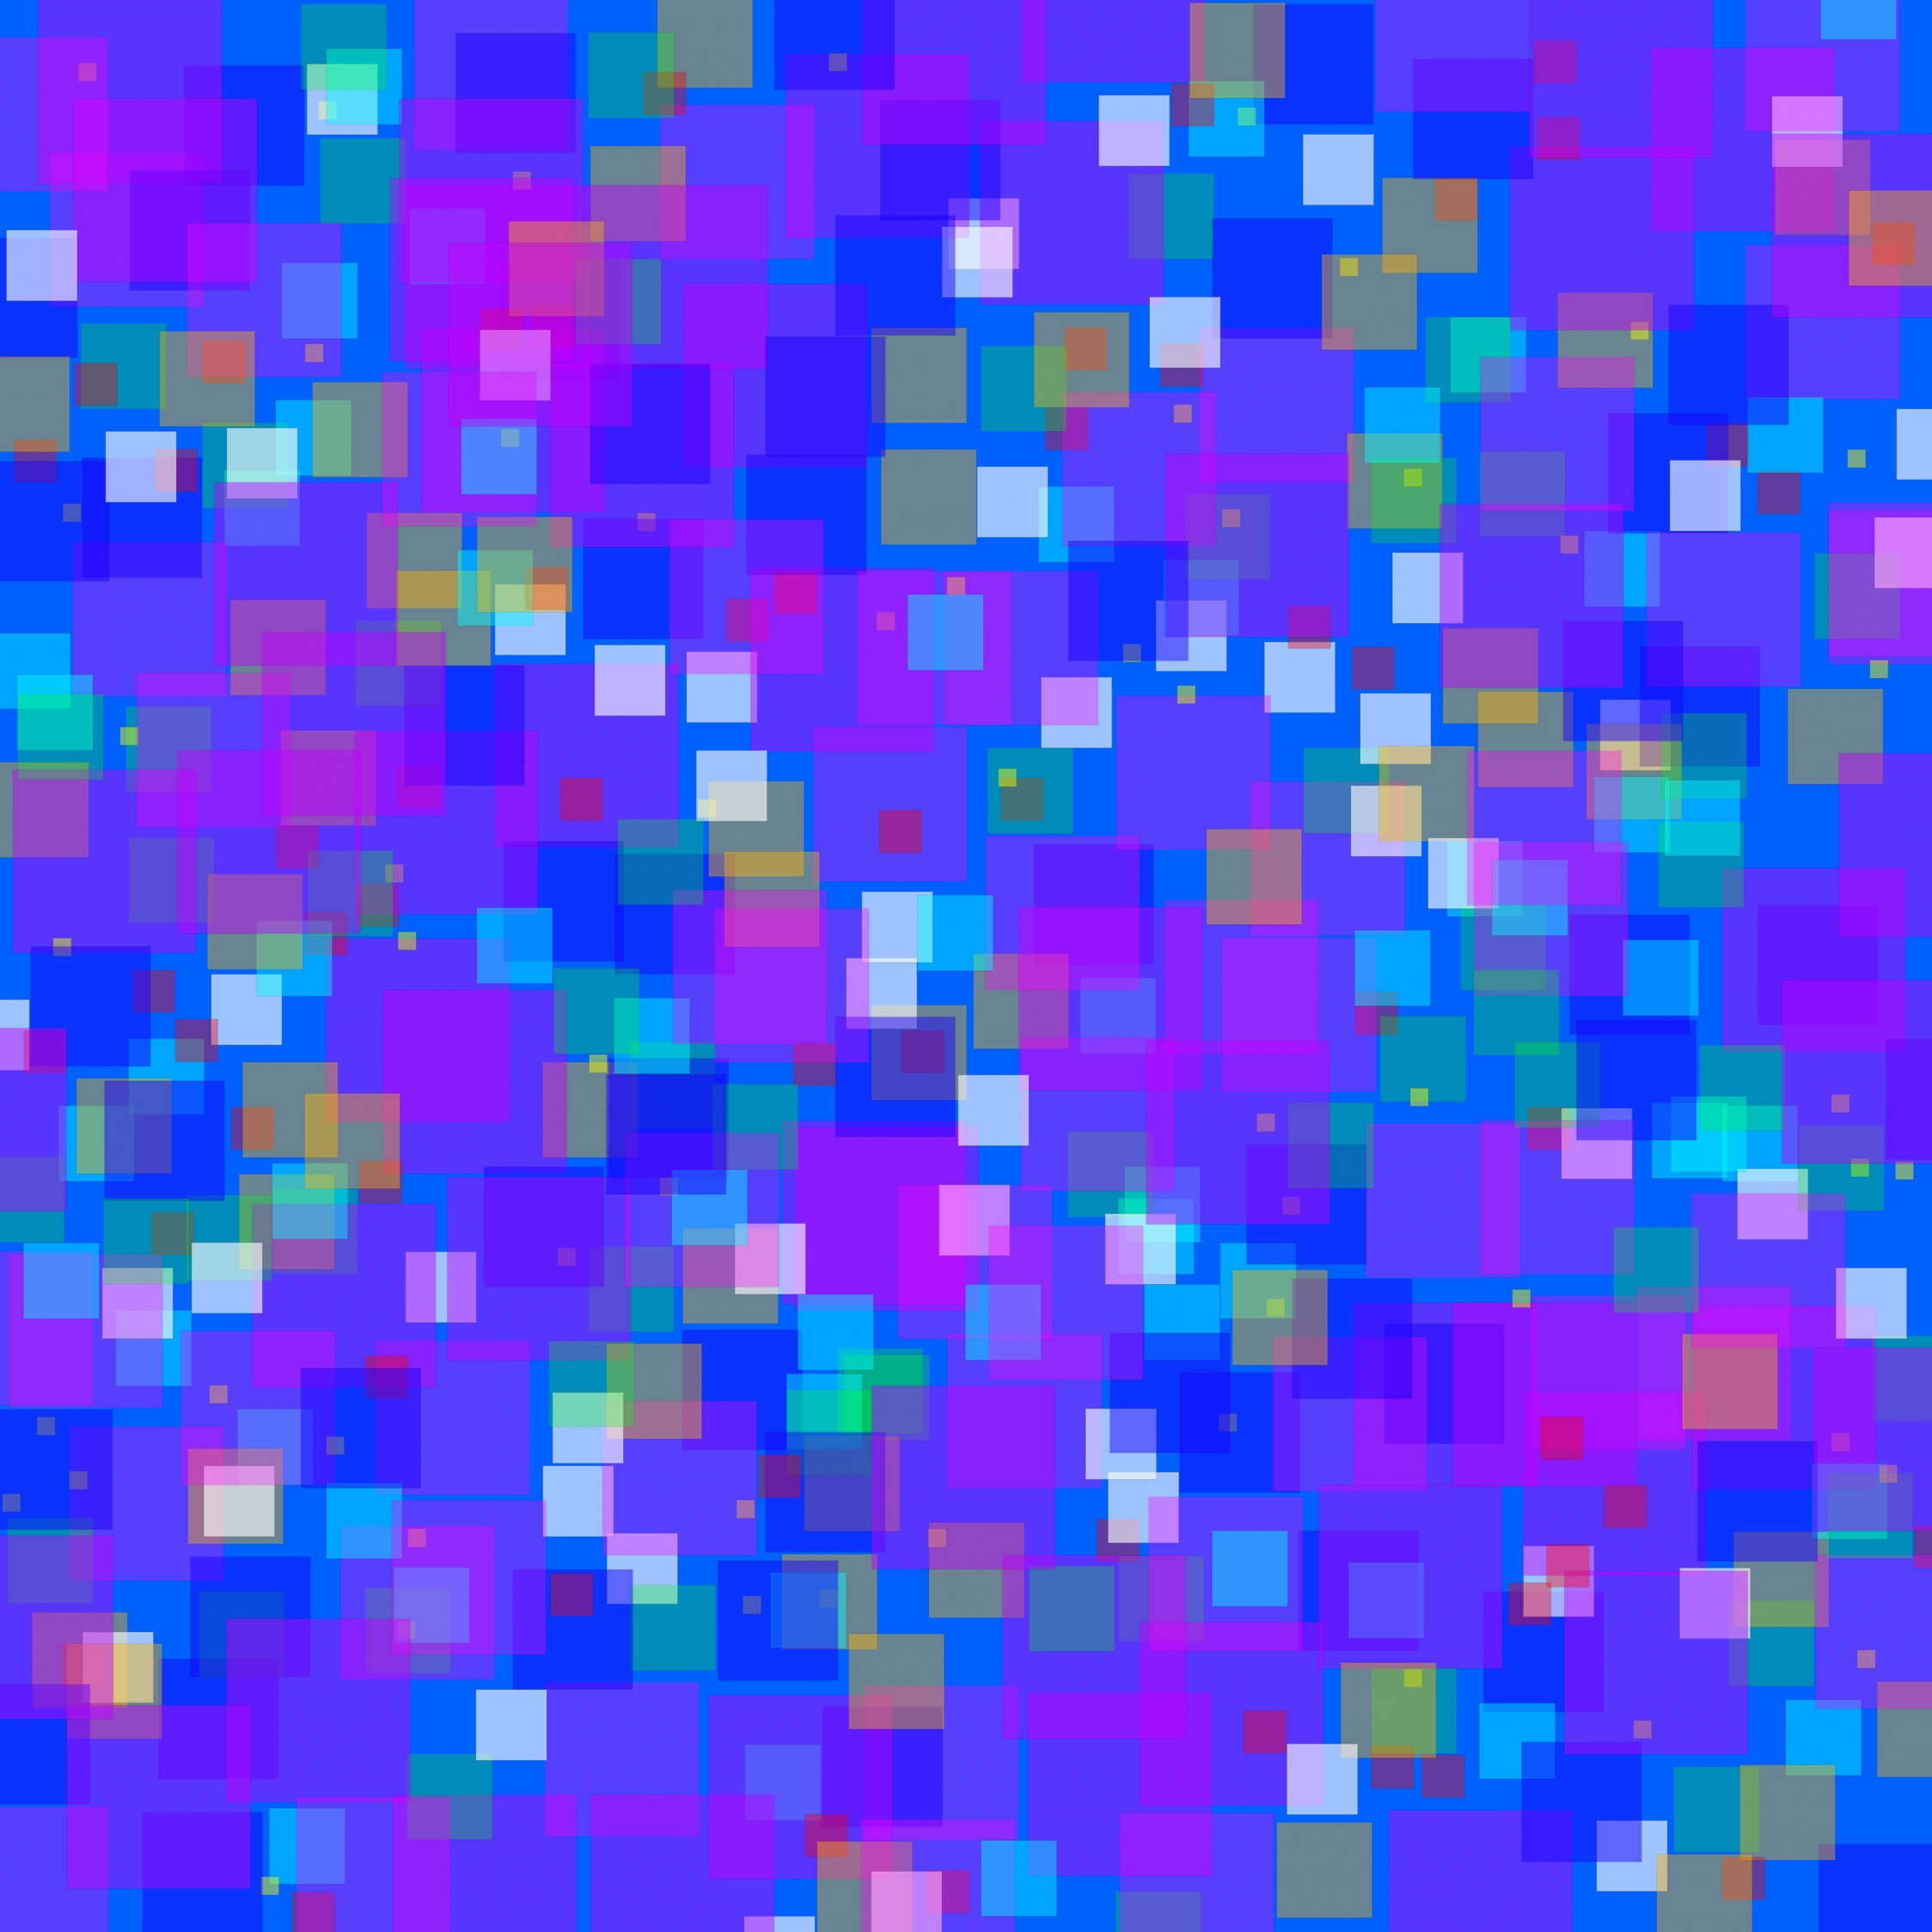 Download wallpaper 2248x2248 background, blue squares, abstract, ipad ...